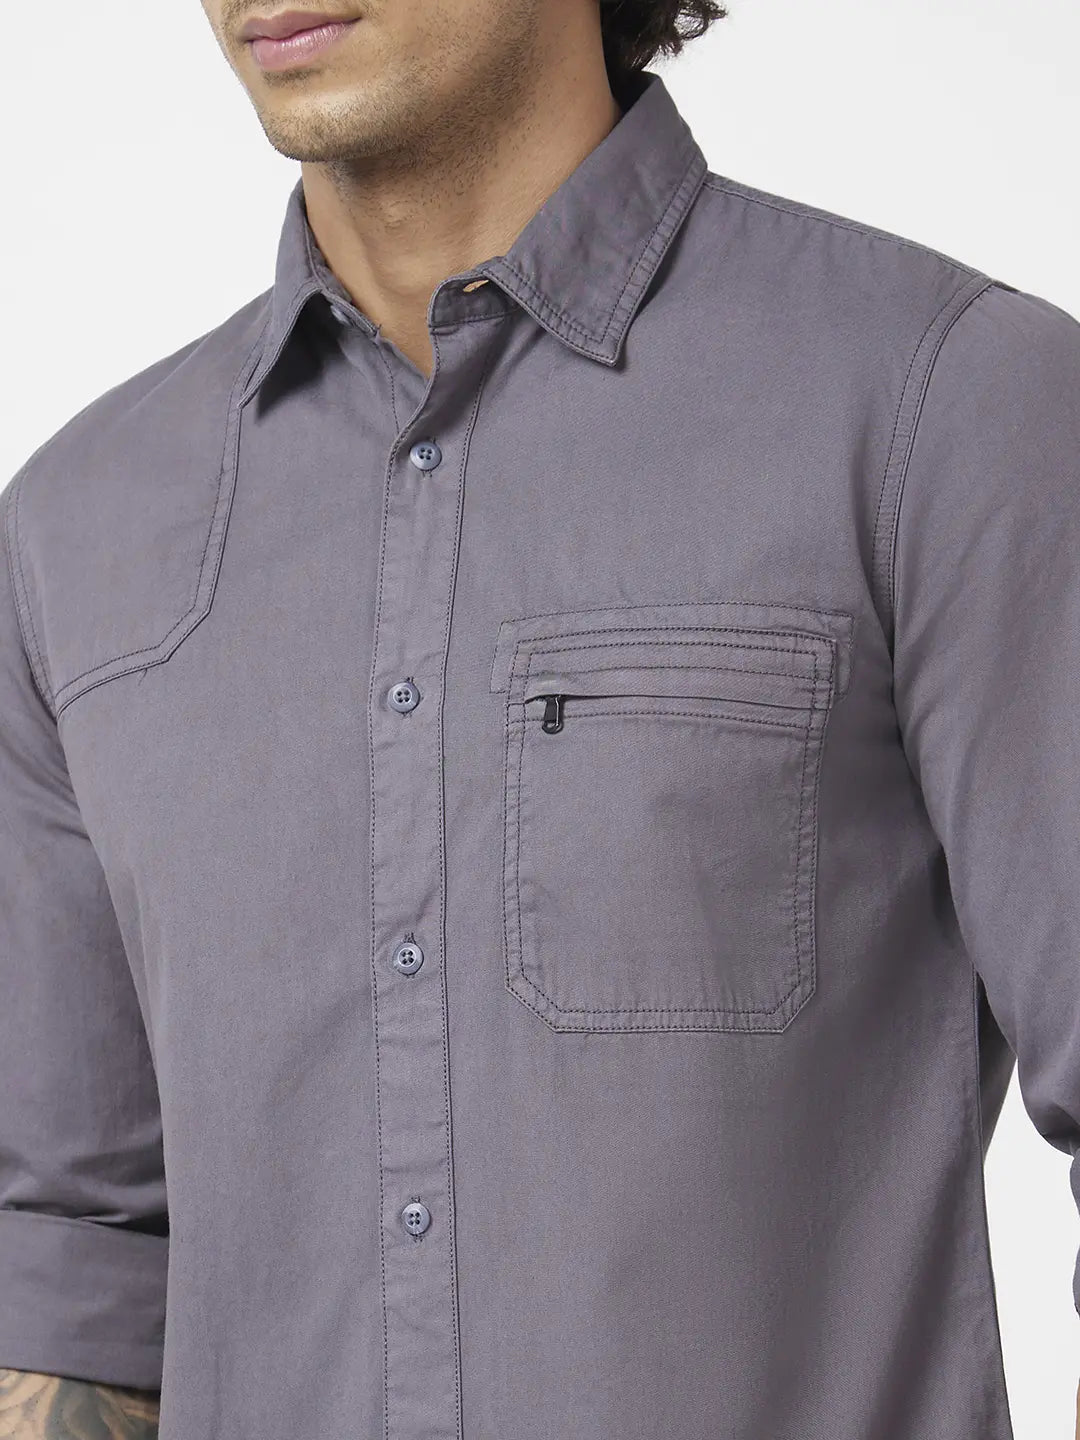 Moon City Casual Denim Shirt for Men (Small, Grey) : Amazon.in: Clothing &  Accessories